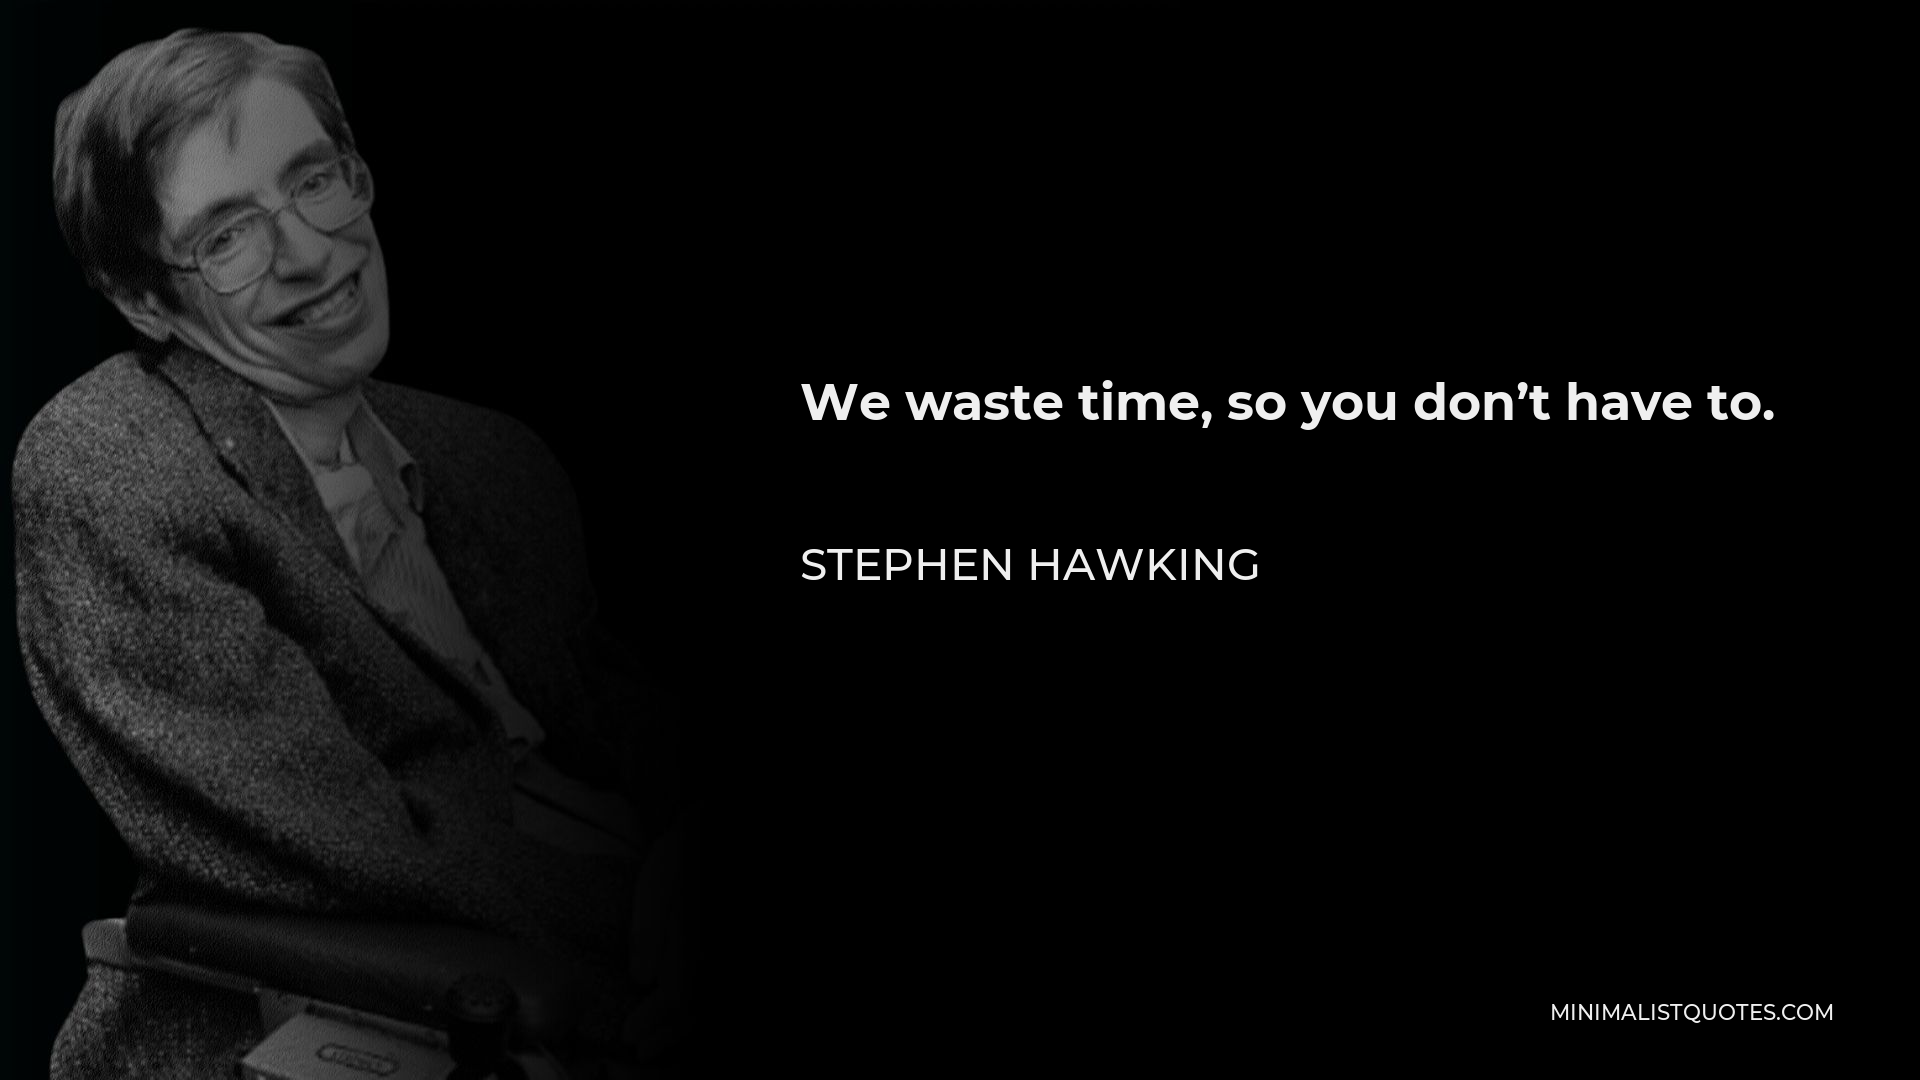 Stephen Hawking Quote - We waste time, so you don’t have to.